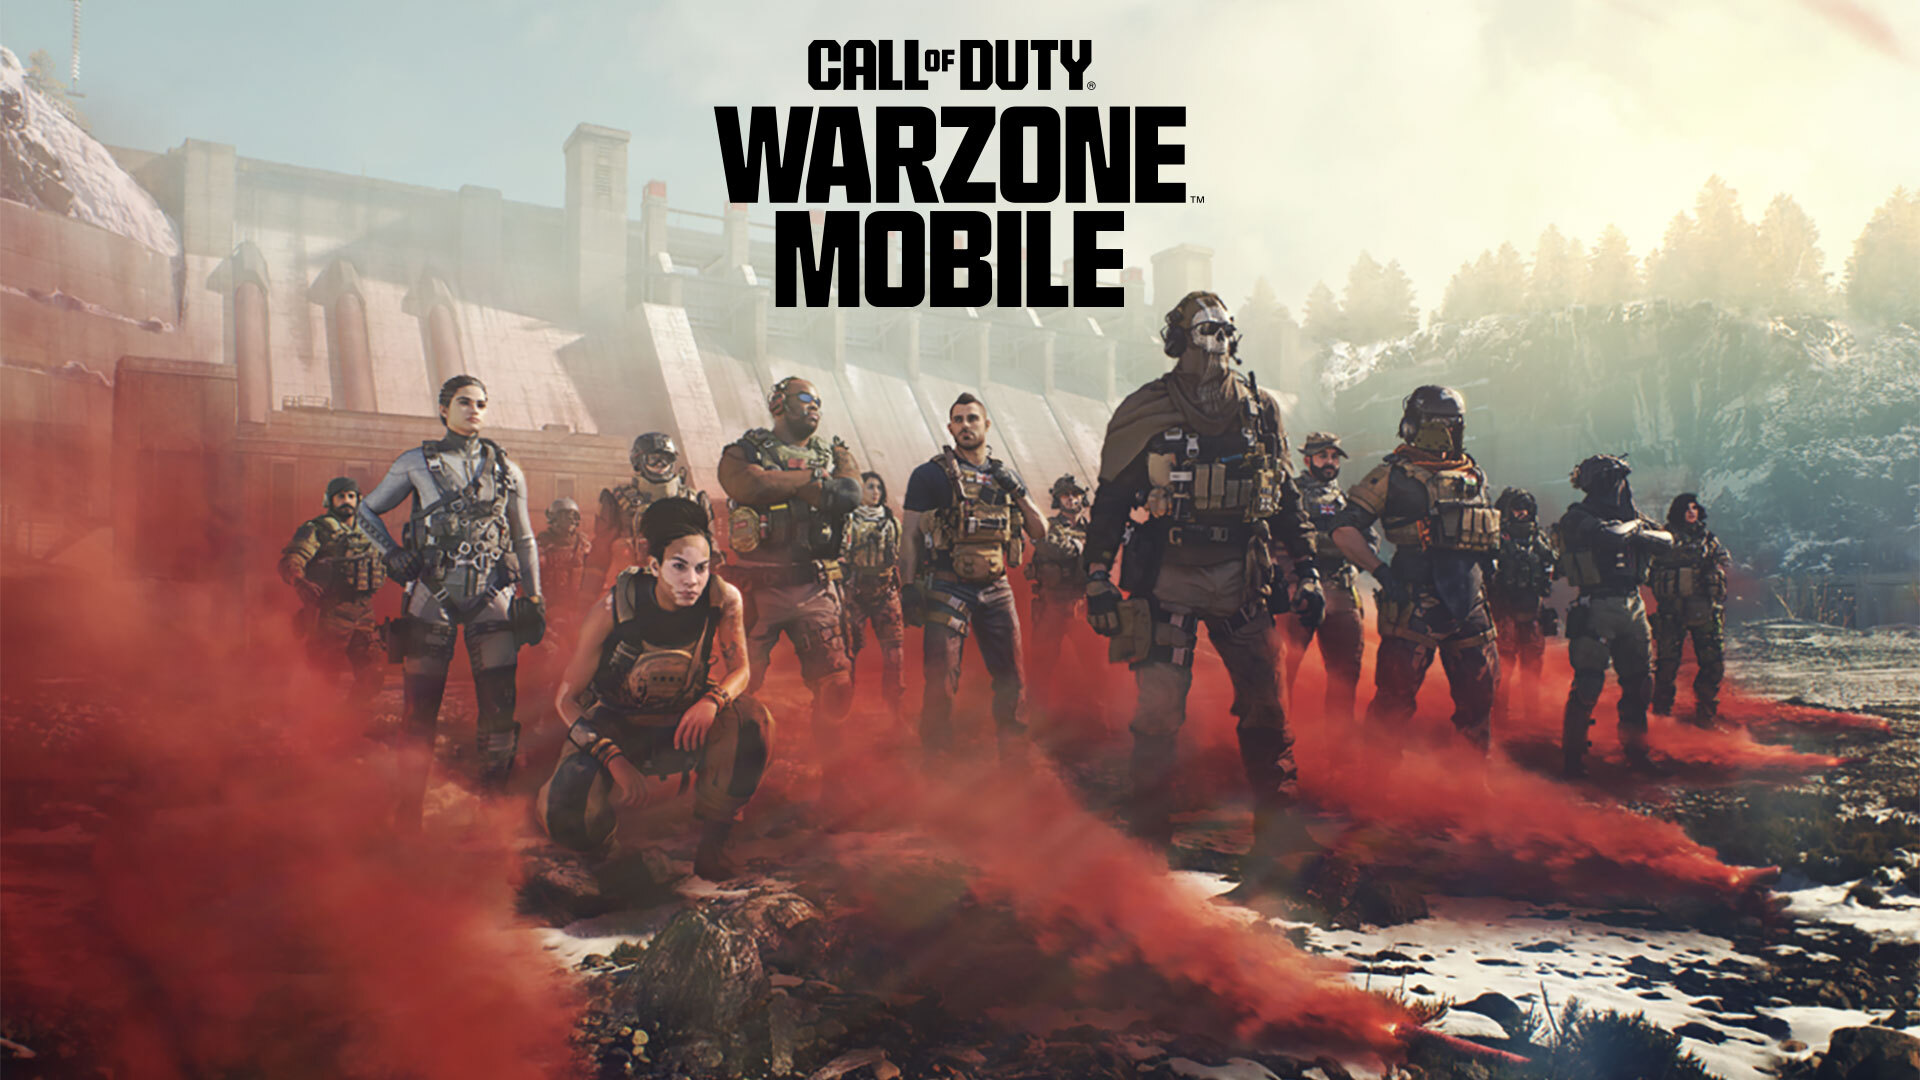 Download Call of Duty: Warzone 2.9.1.15906893 for Android